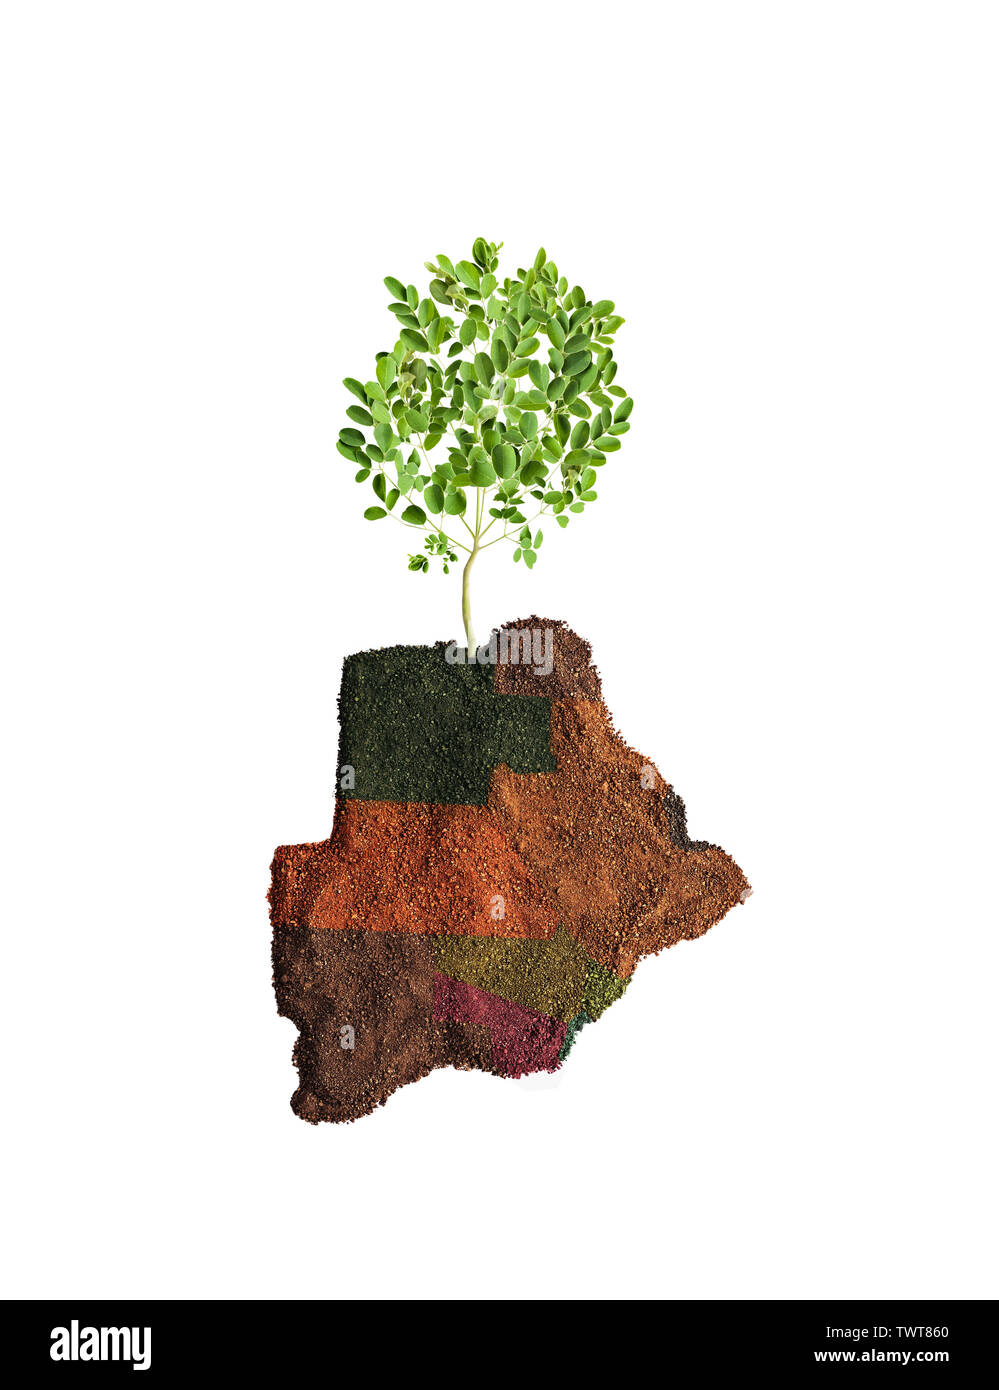 conceptual Botswana  map recycling or agriculture, growing a tree Stock Photo